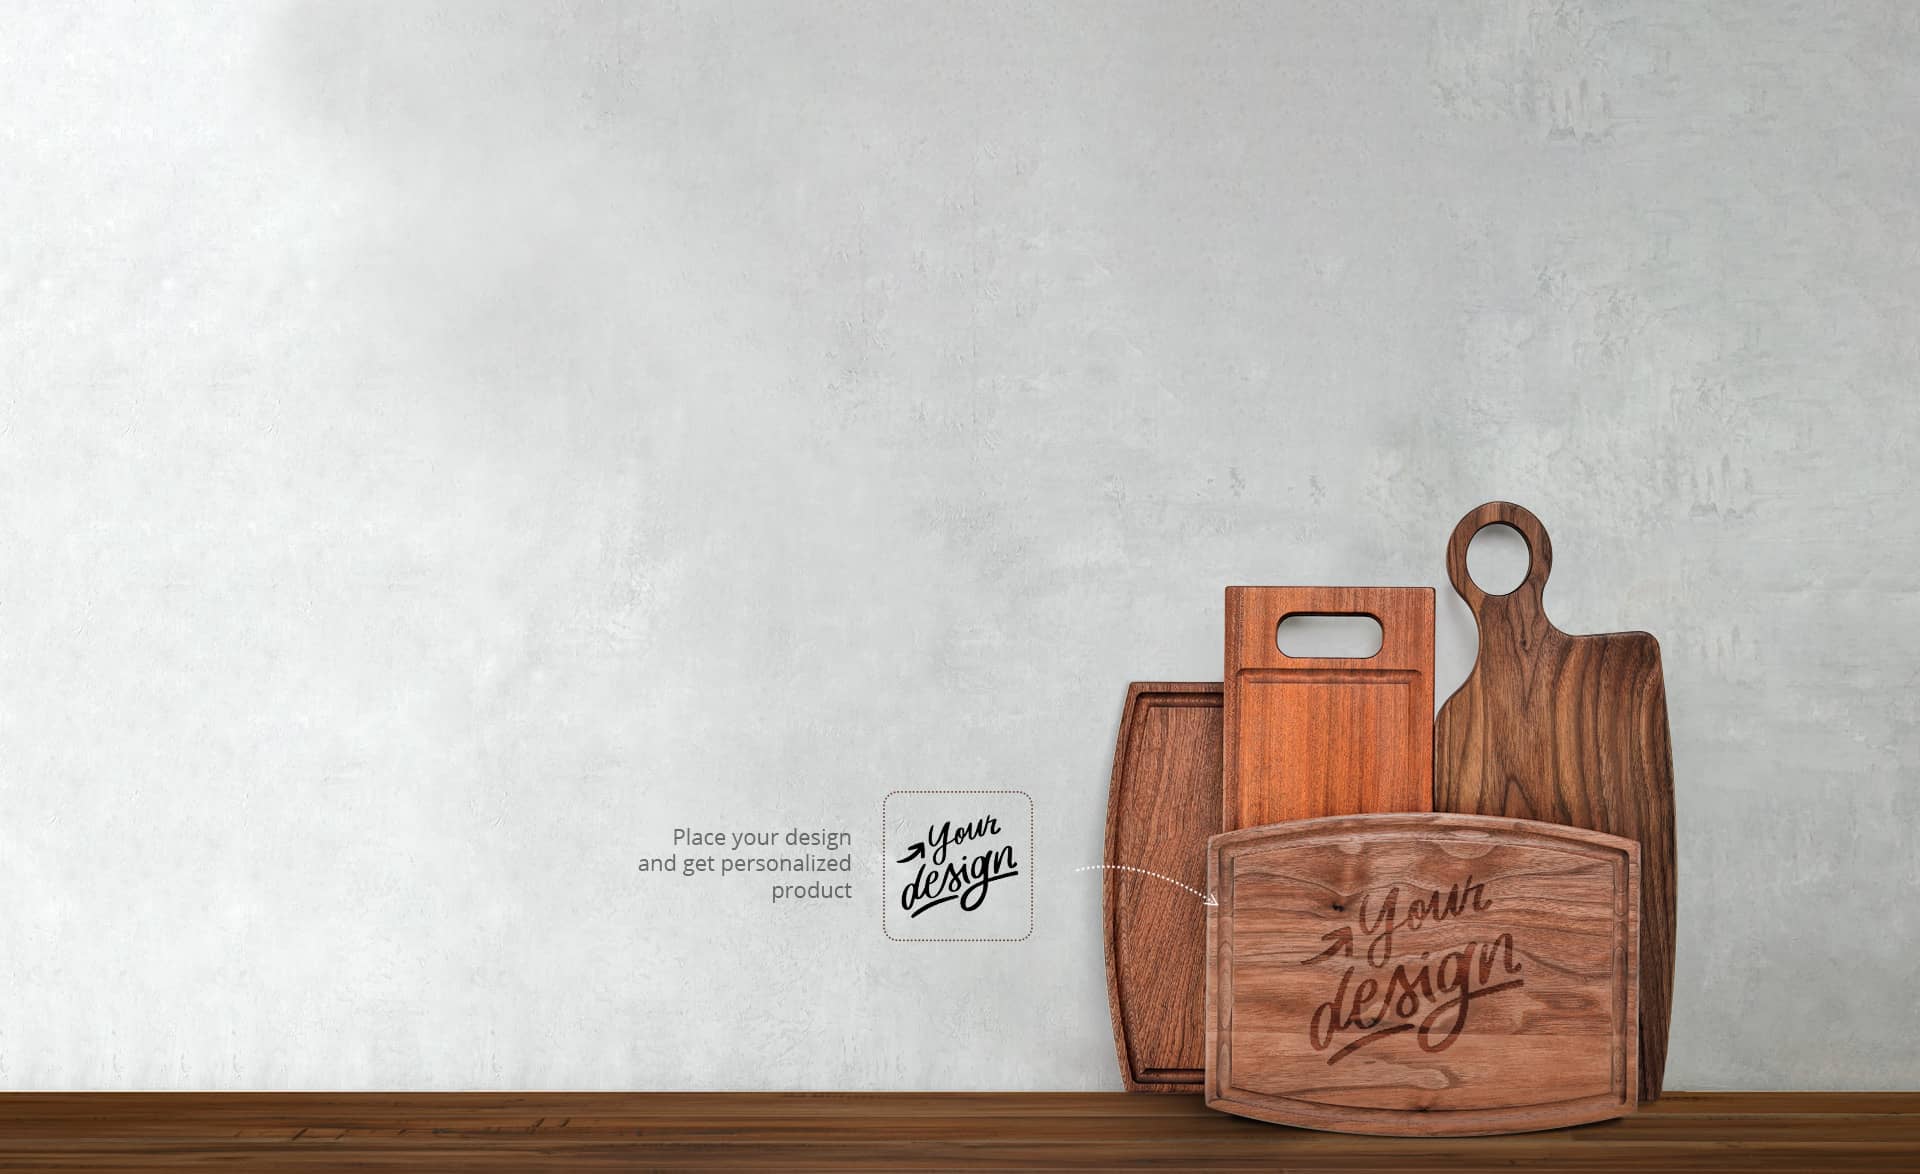 Shop our cutting boards and personalize them